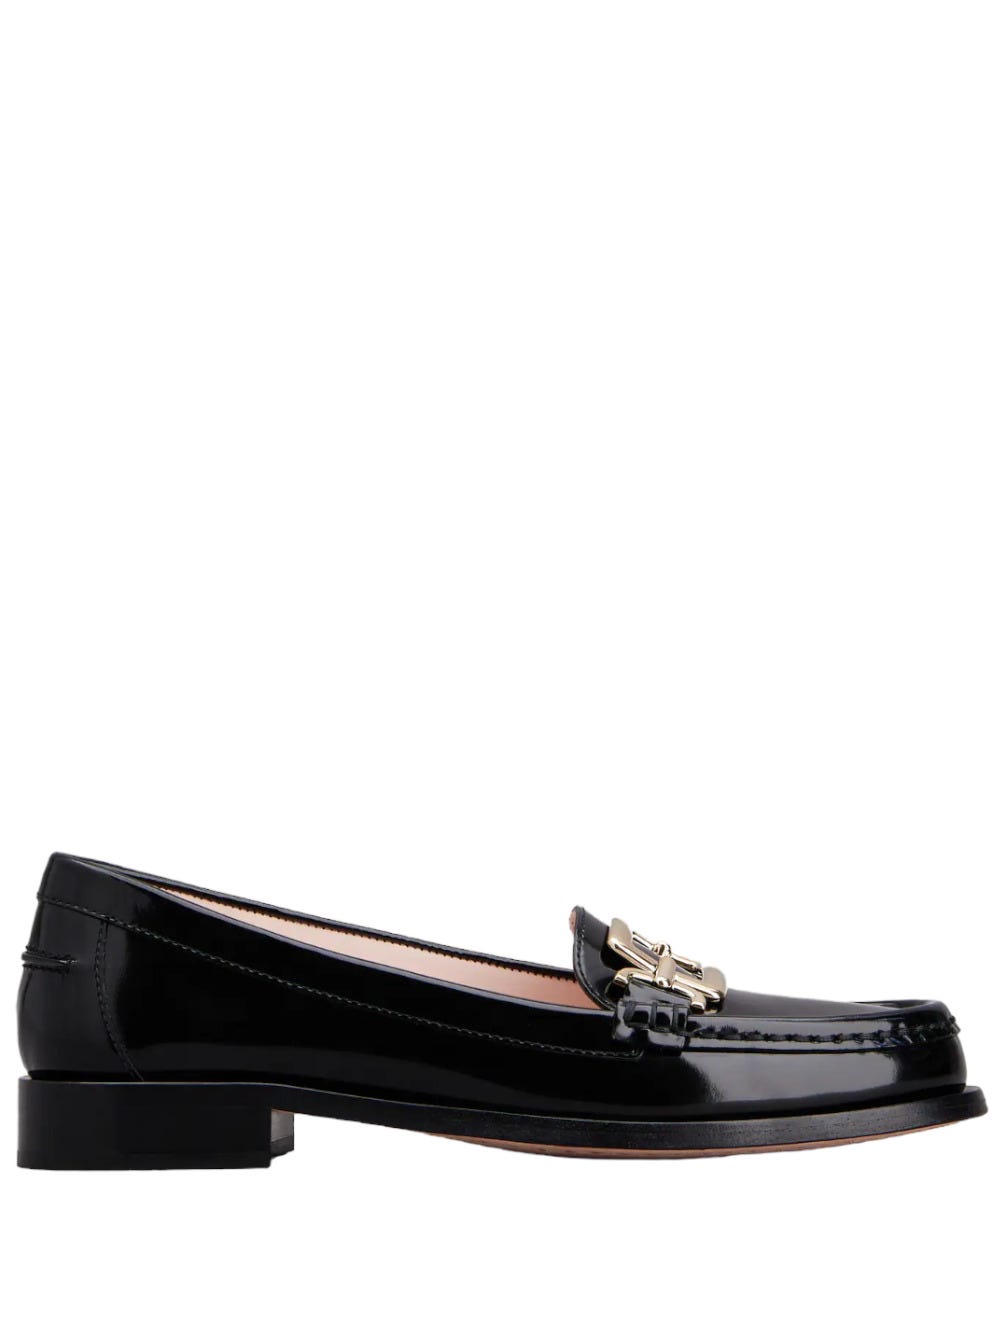 ROGER VIVIER BLACK PATENT LEATHER MORSETTO LOAFERS WITH METAL BUCKLE